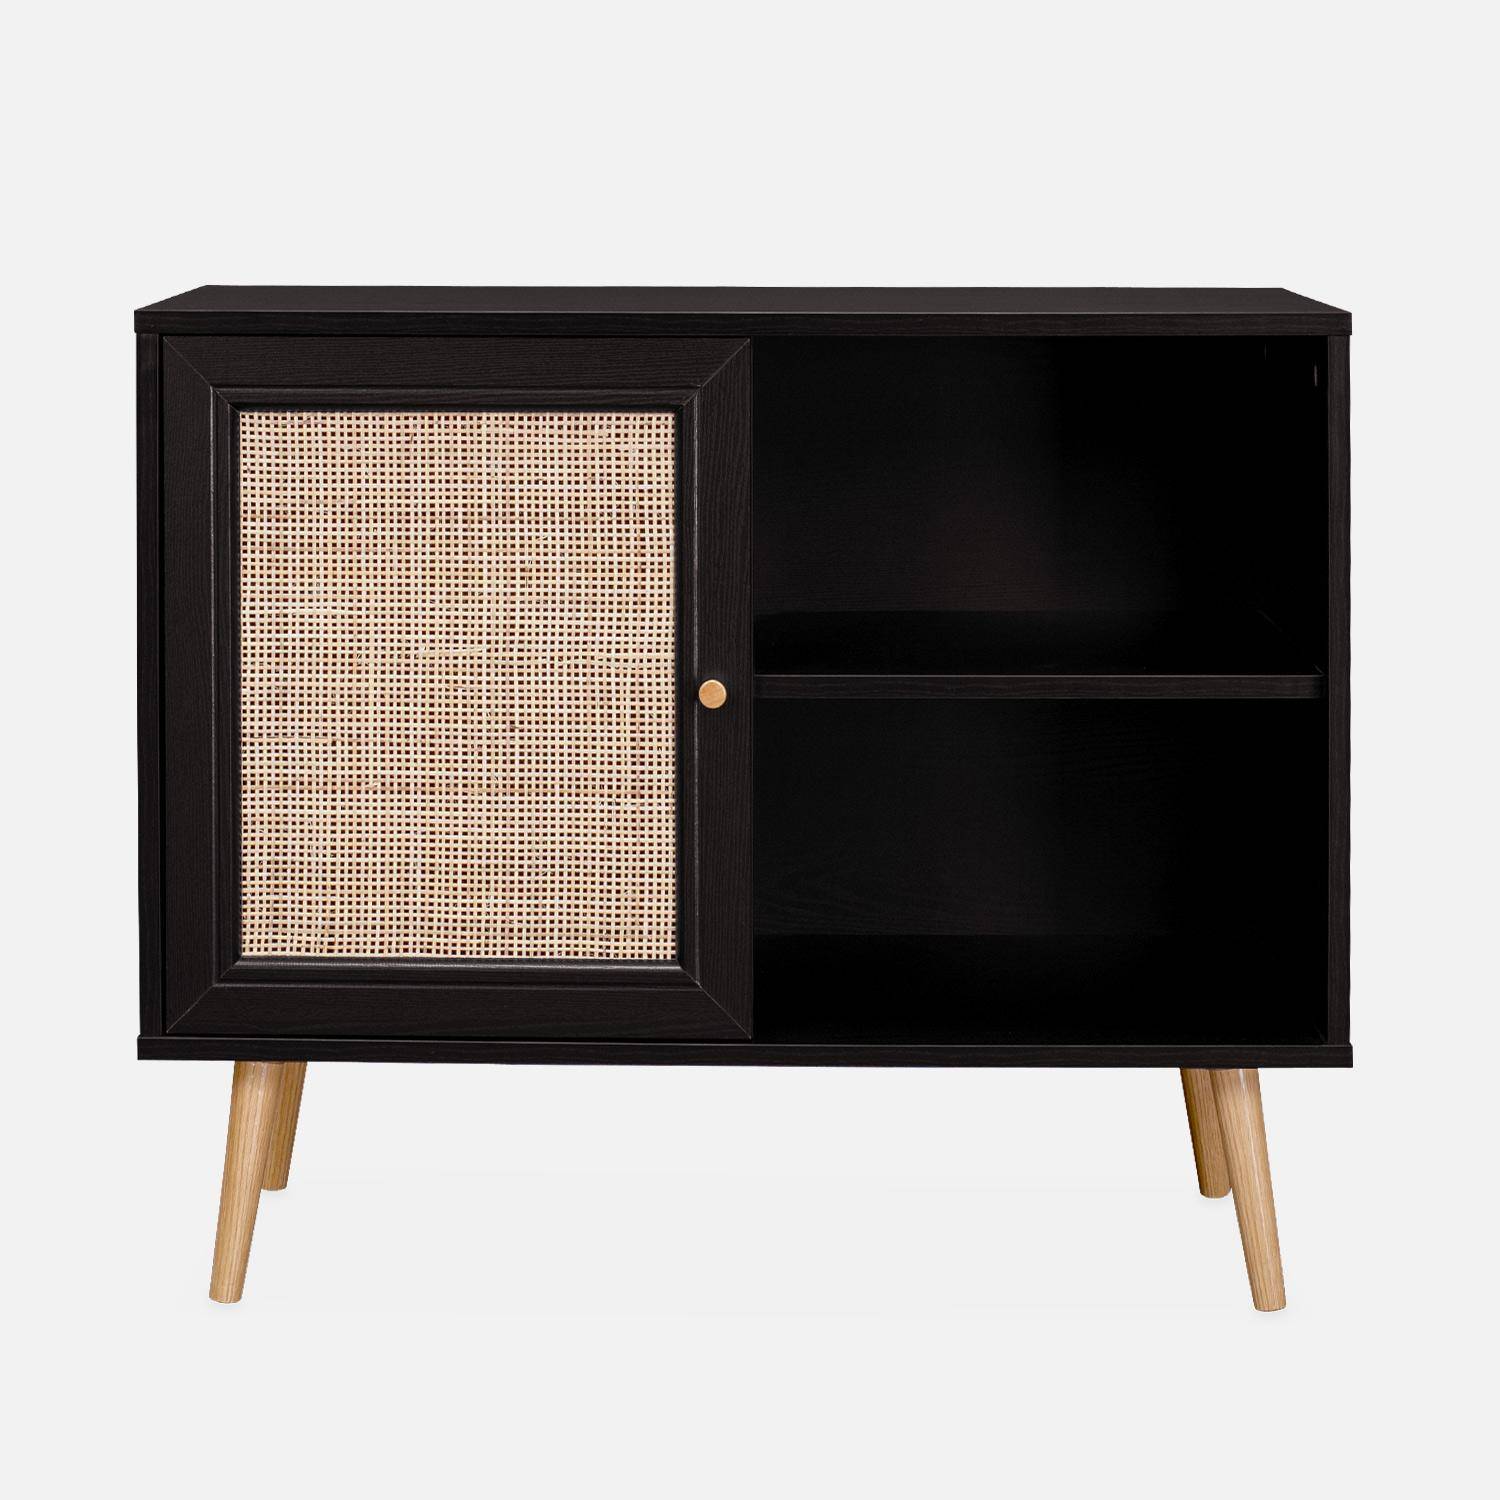 Wooden and cane rattan detail storage cabinet with 2 shelves, 1 cupboard, Scandi-style legs, 80x39x65.8cm - Boheme - Black Photo3